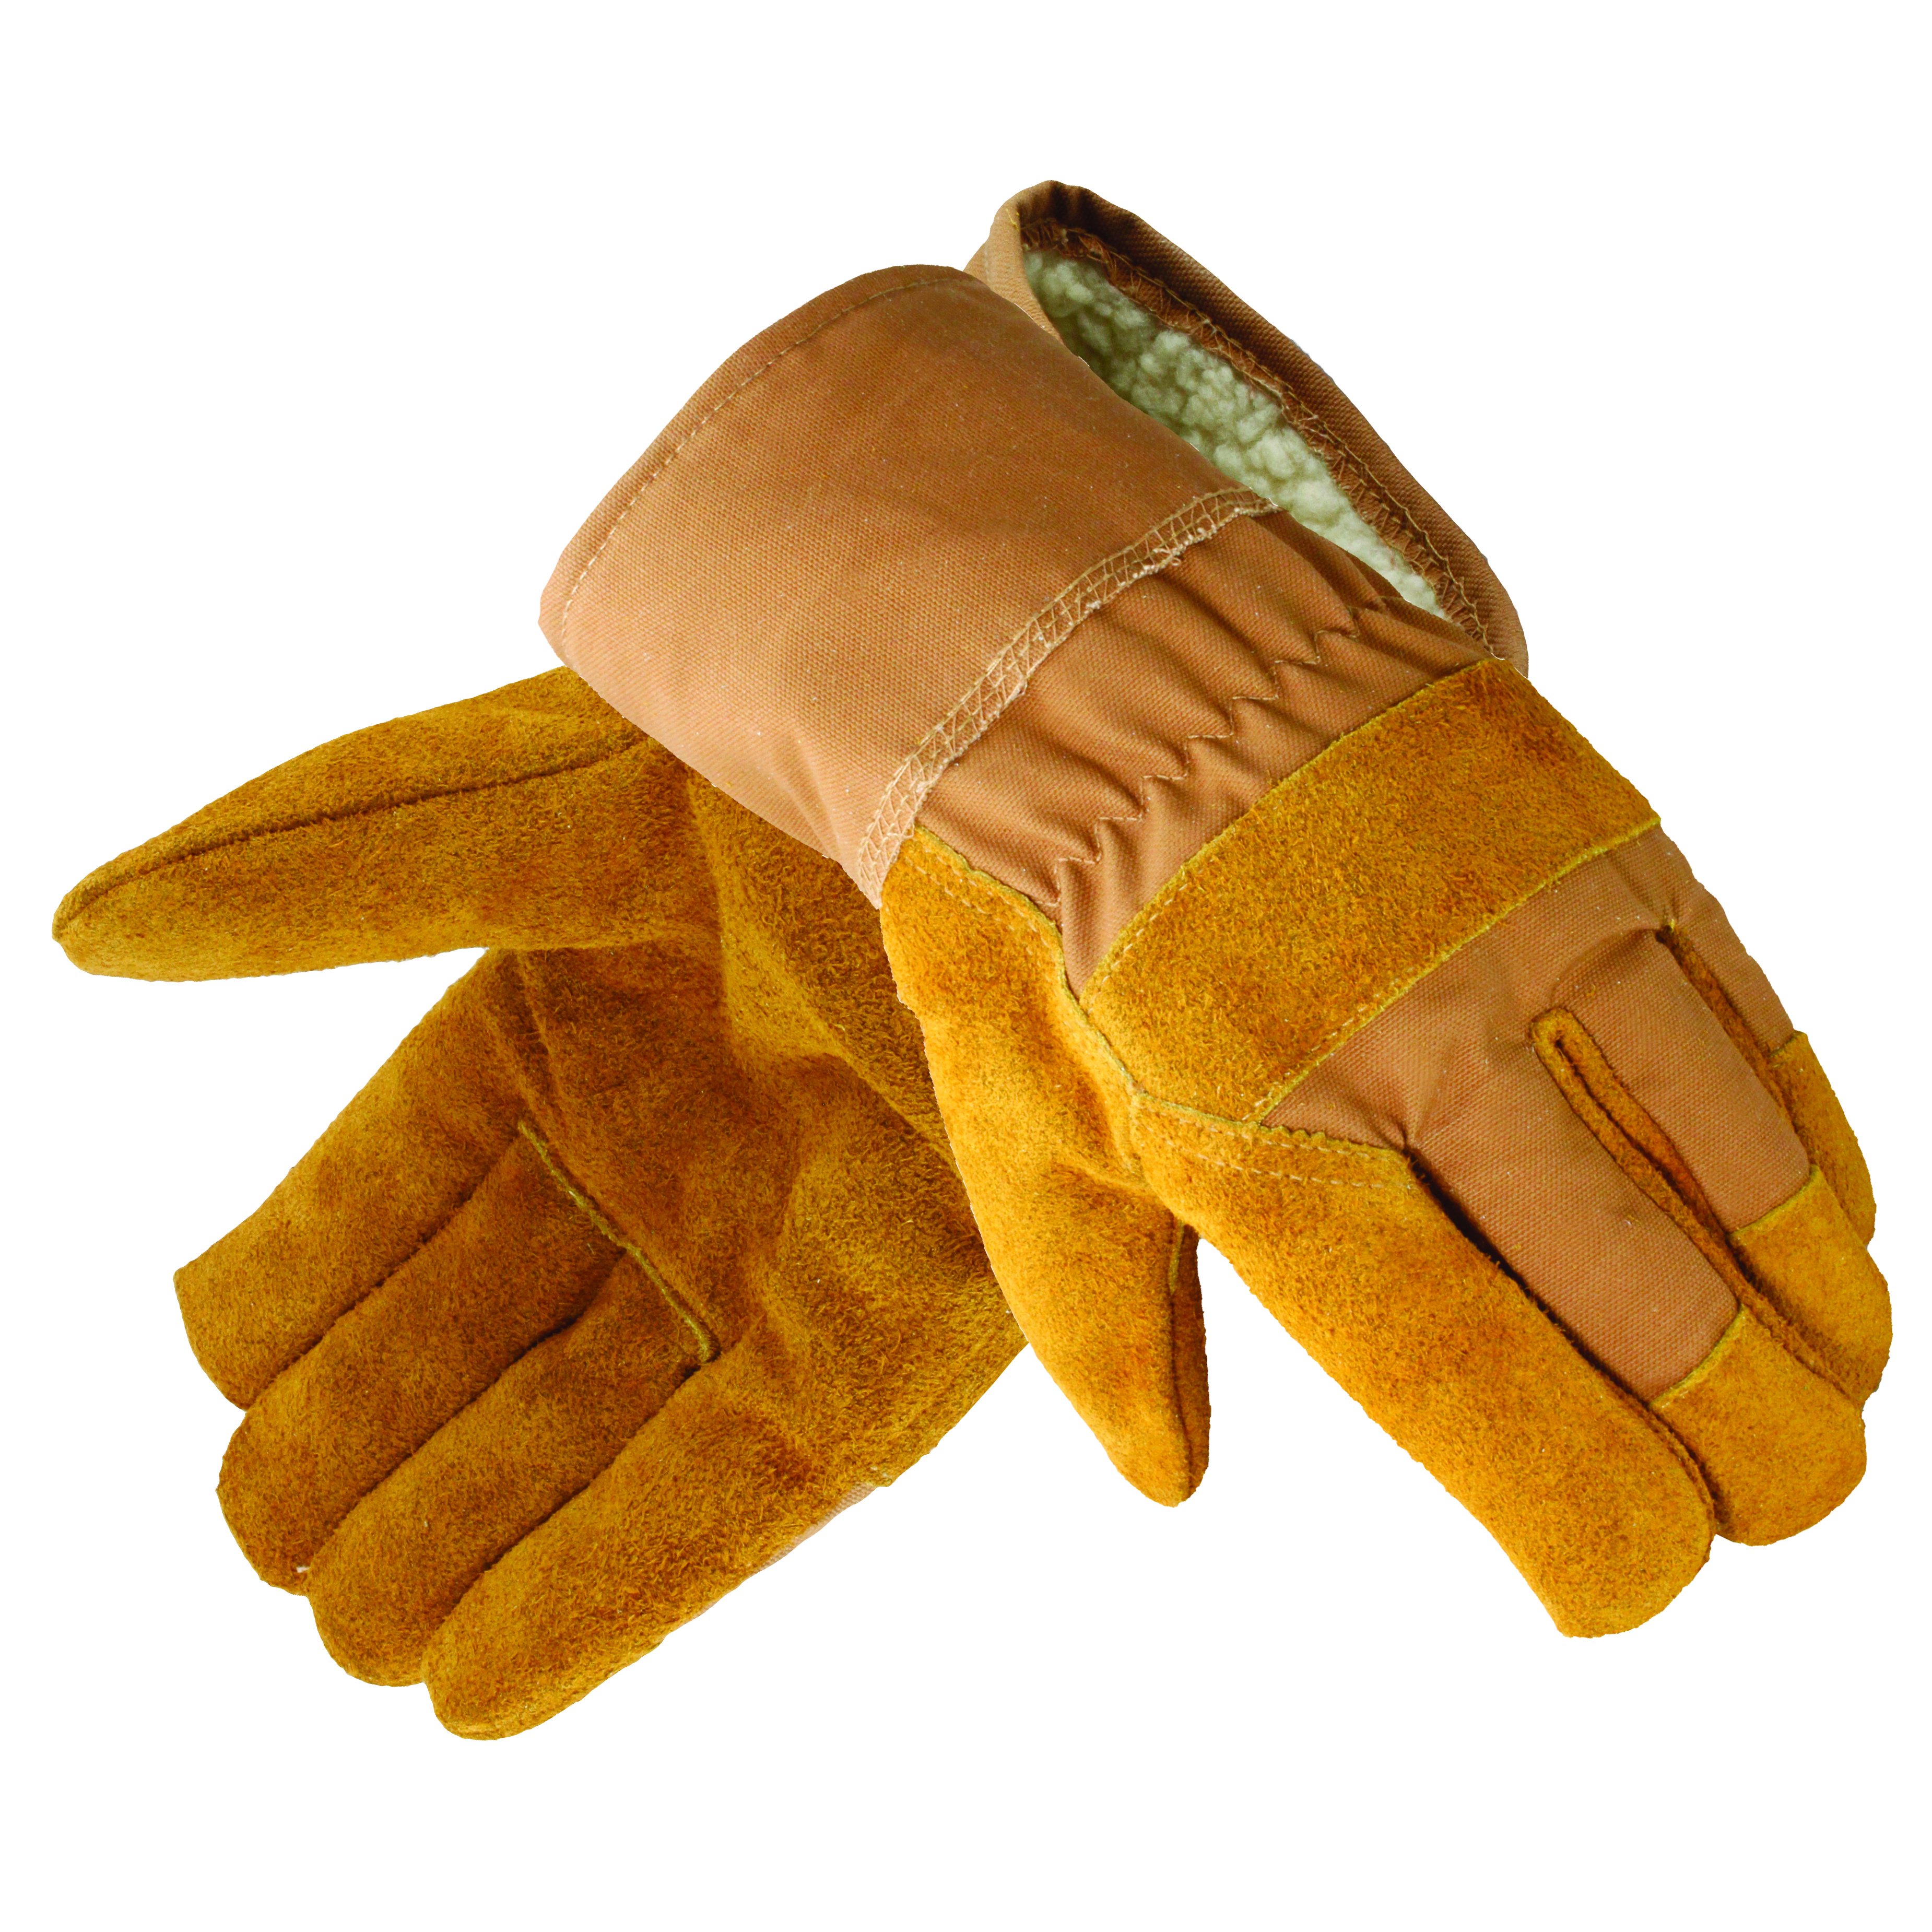 Leather Palm Work Gloves, Pile Lining, 1 Pair